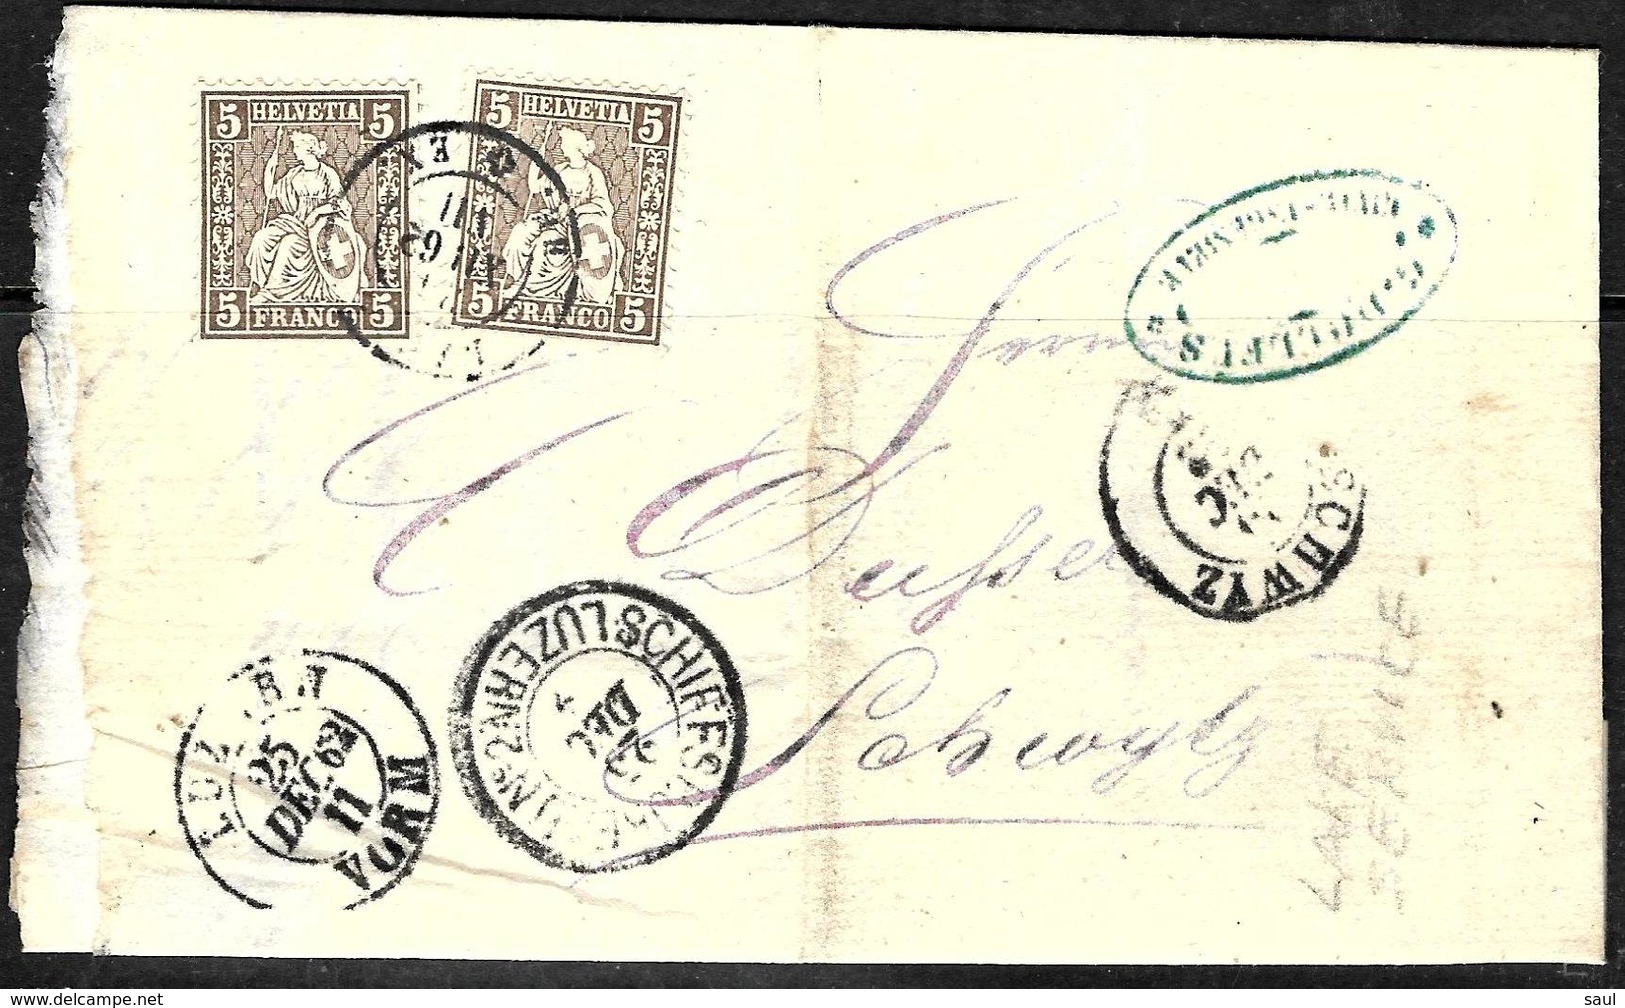 681 - SUISSE - SWITZERLAND - 1862 - COVER - LAKE SERVICE - POSSIBLE FORGERY, FALSE, FAUX, FALSO, FALSCH - Unclassified